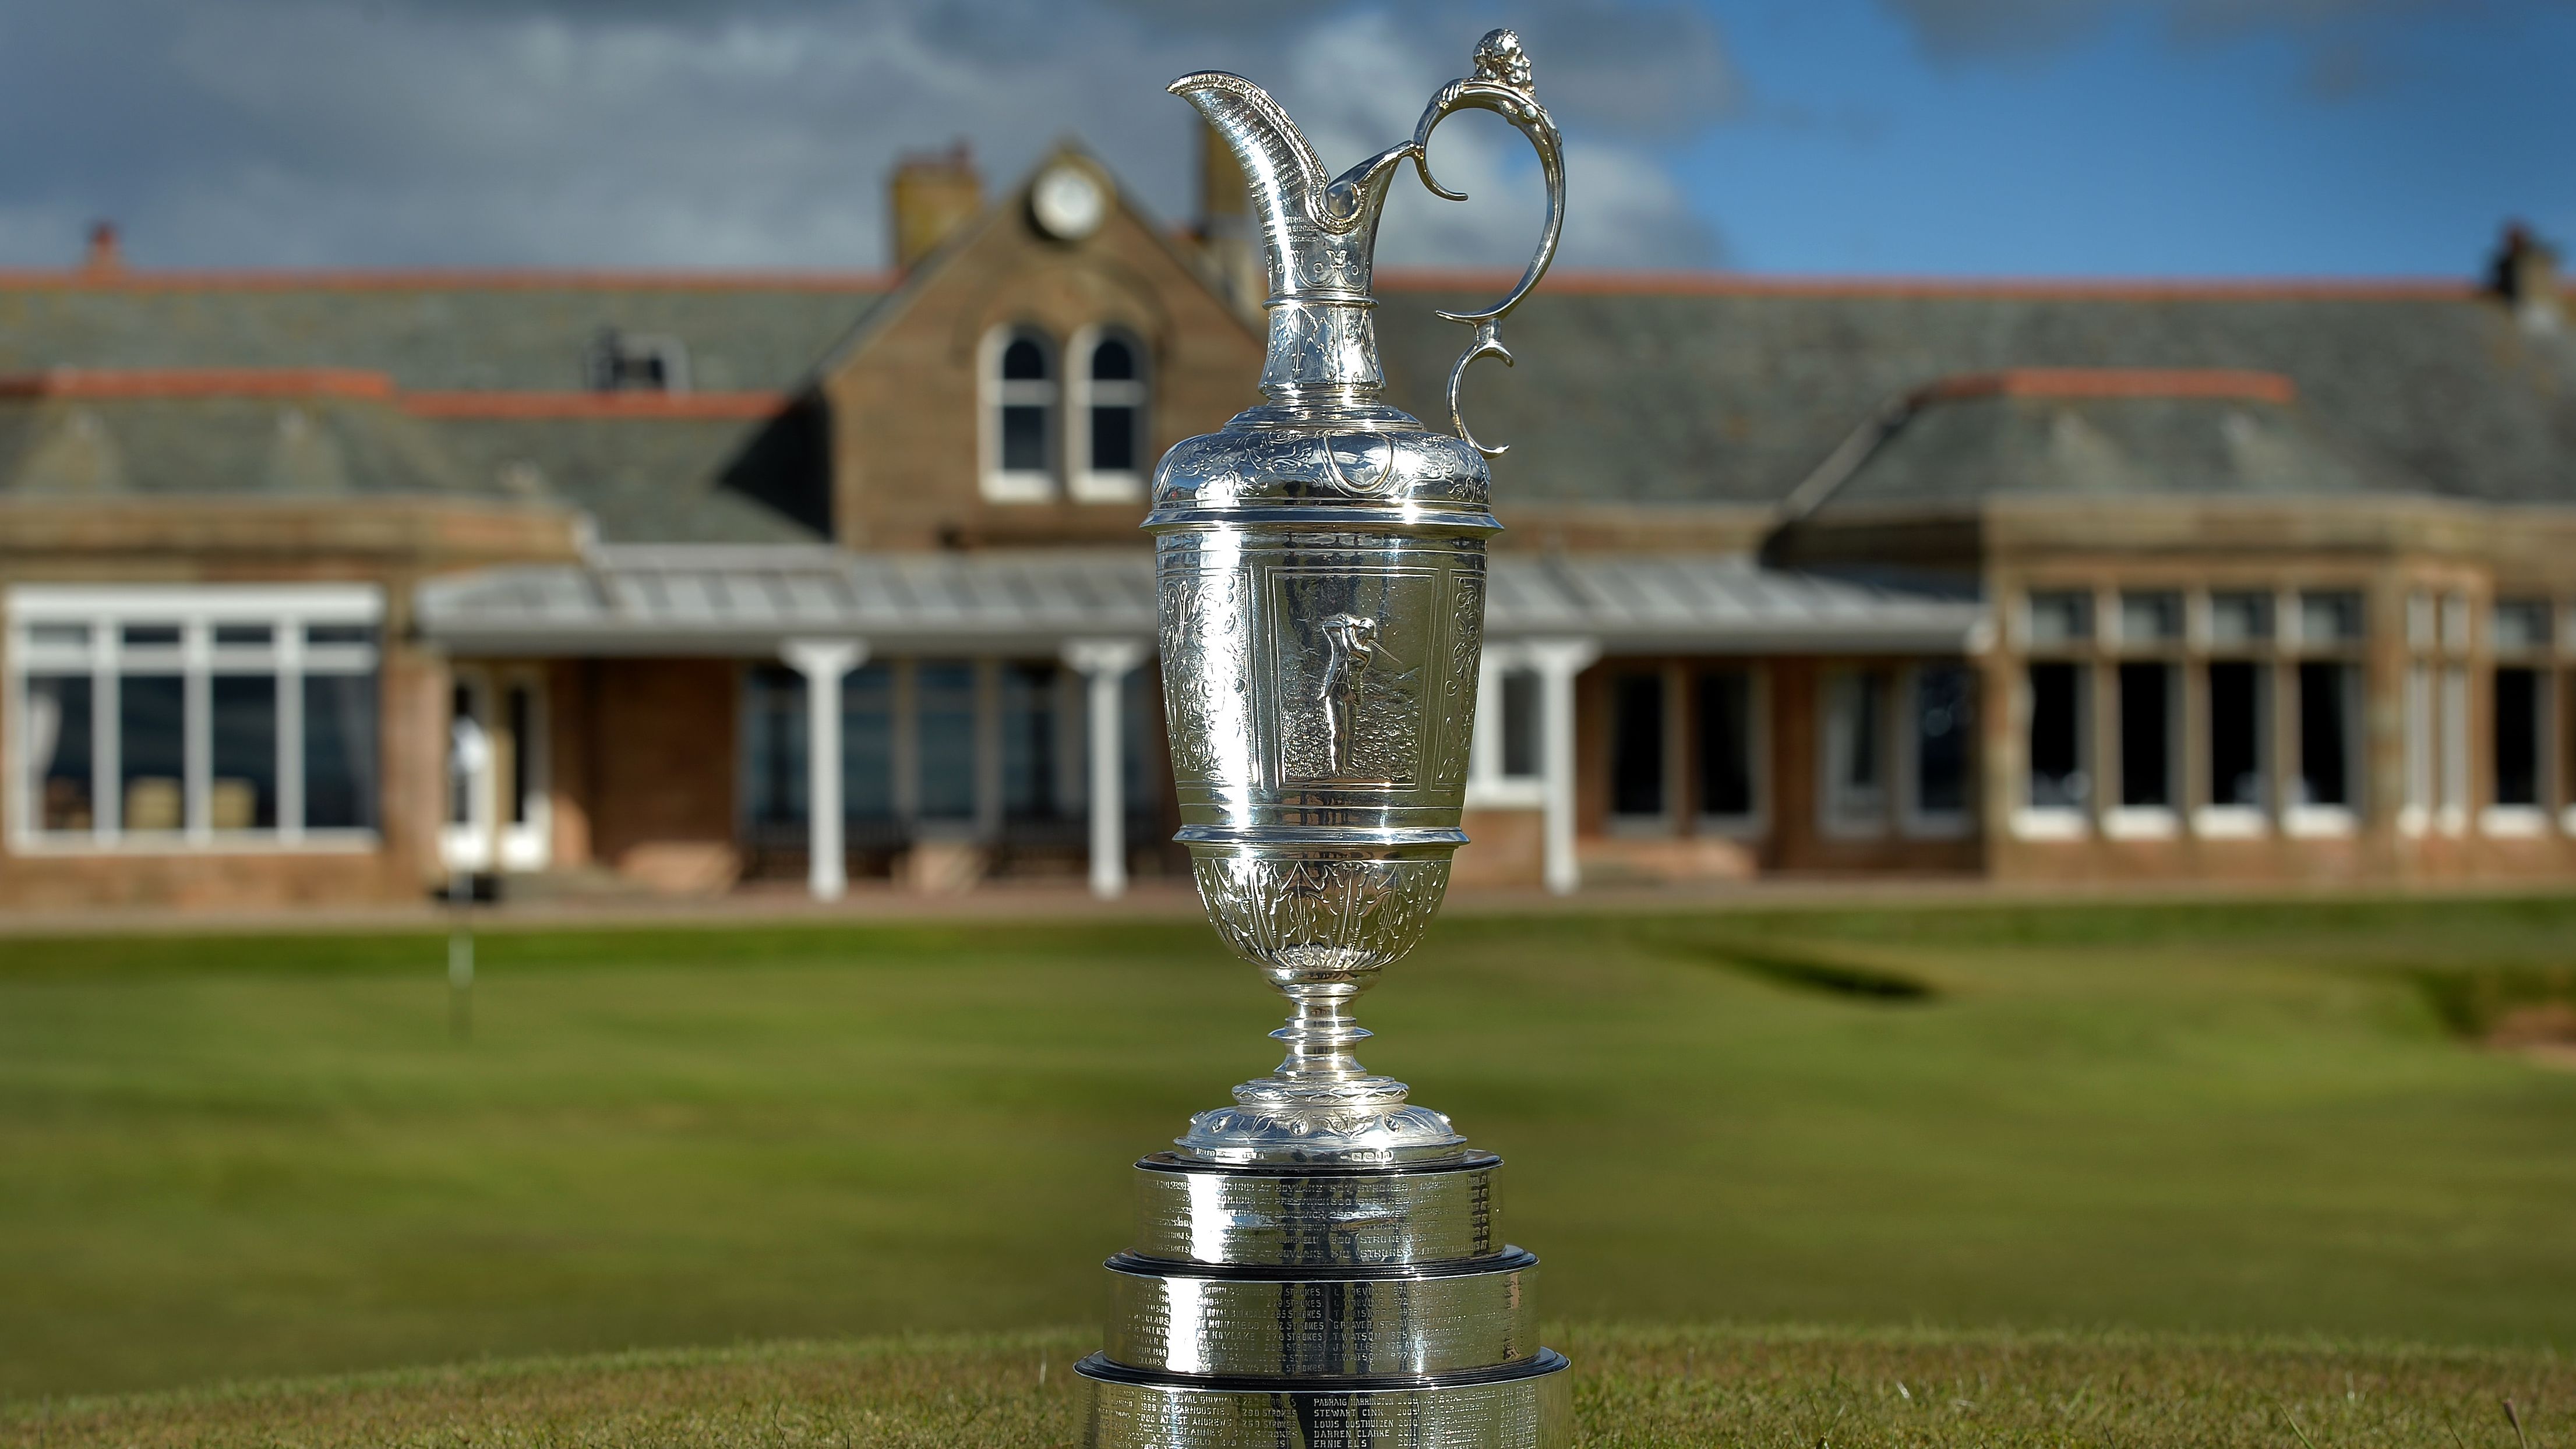 The British Open, which returns to Royal Troon in July, began in 1860.